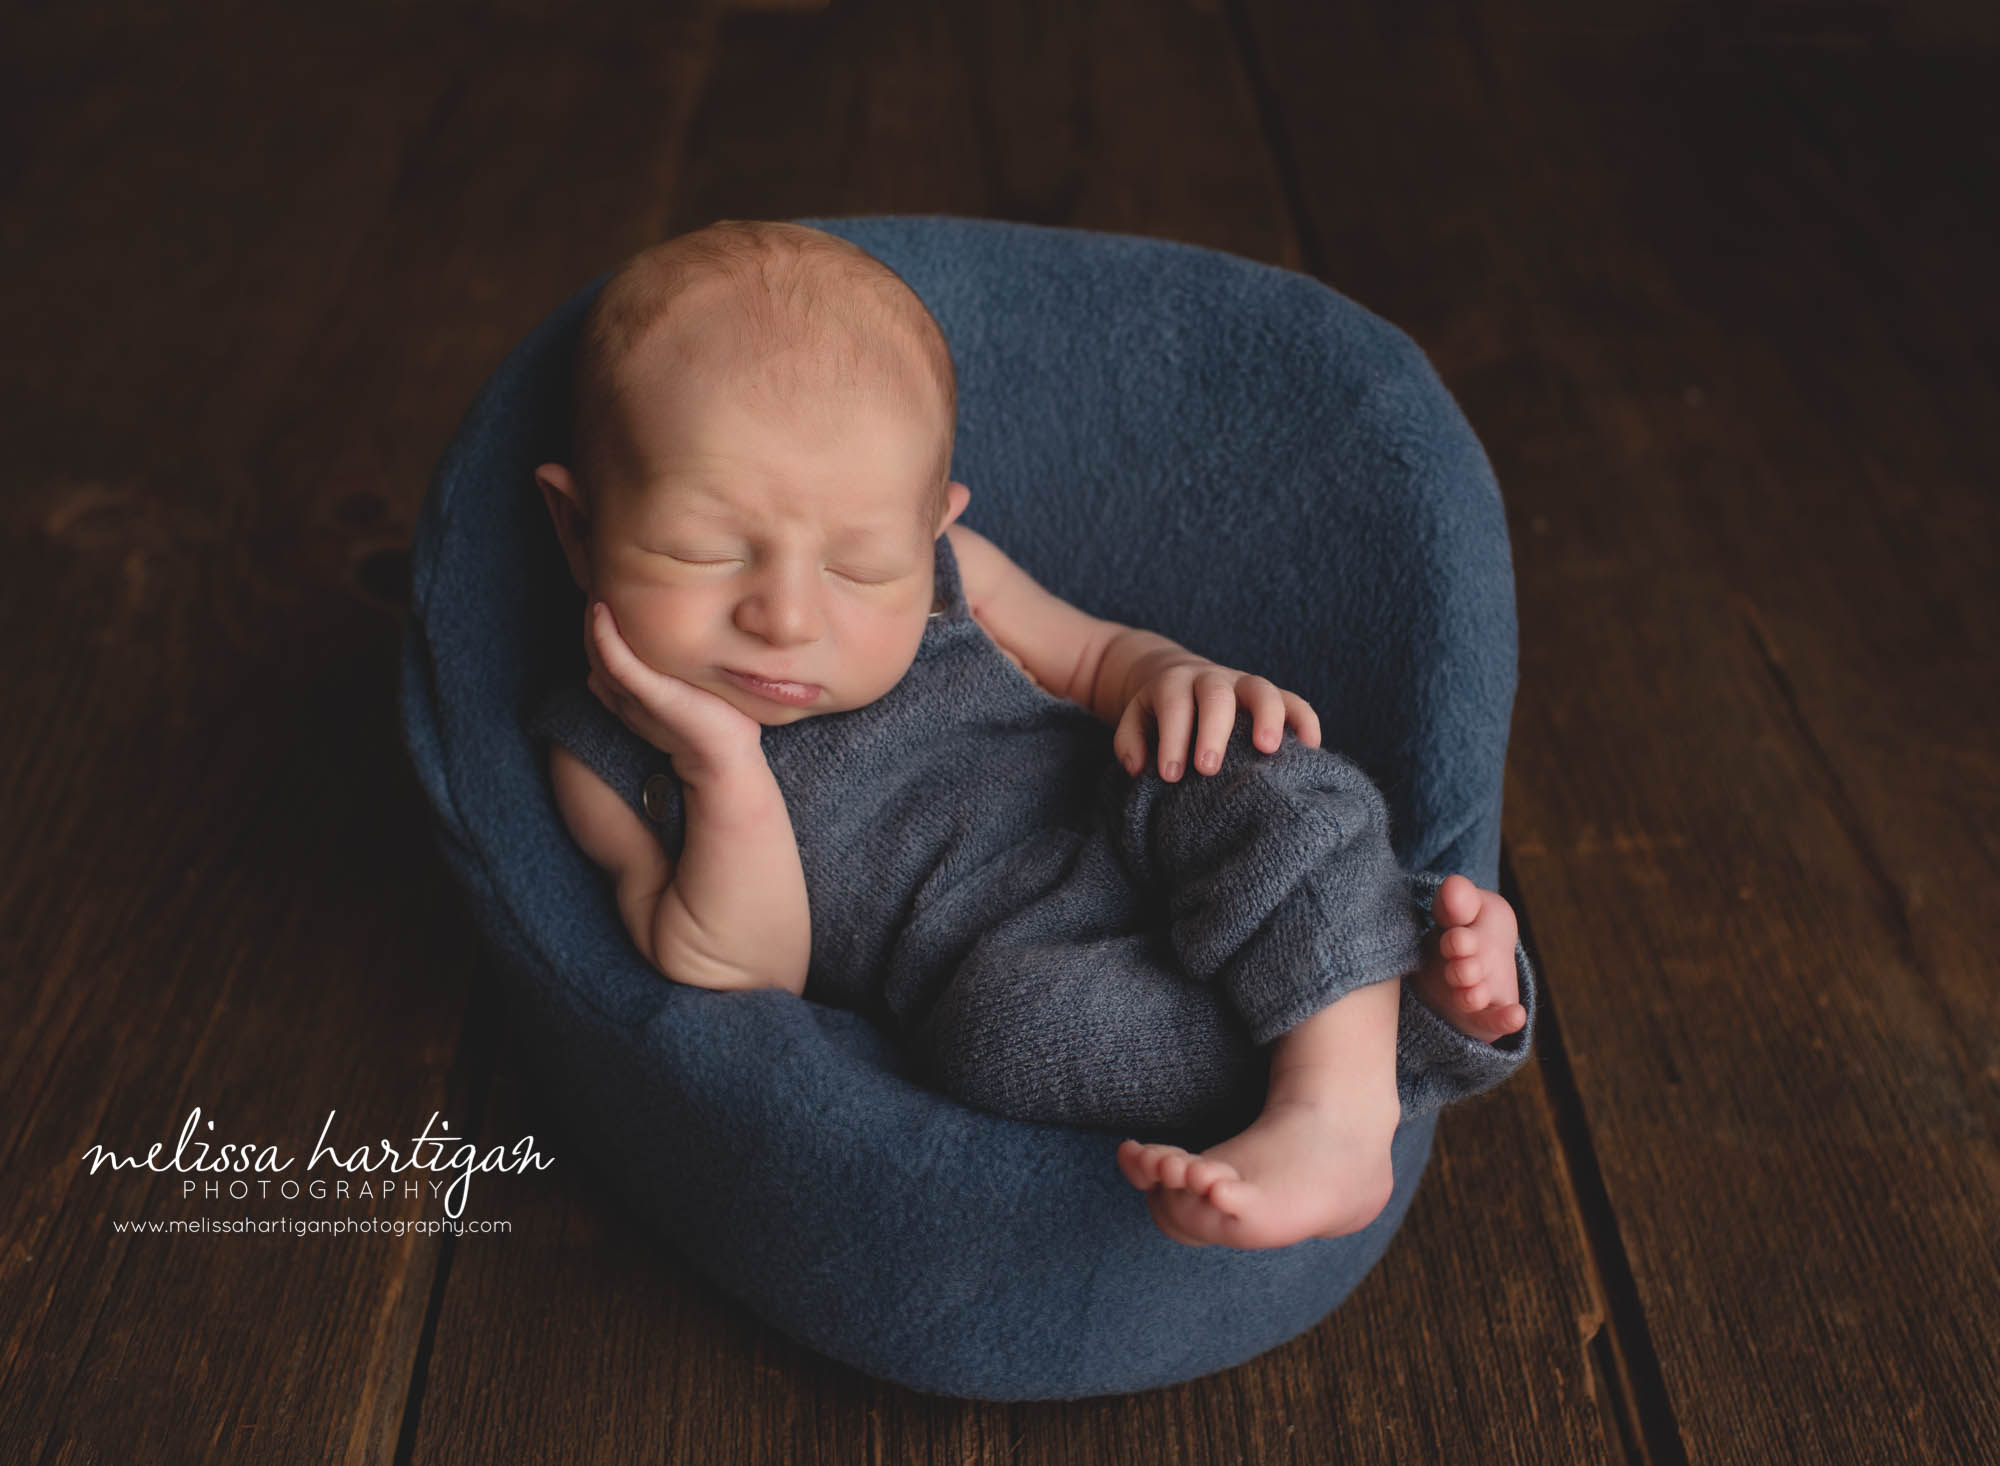 baby boy posed in posing chair wearing blue outfit